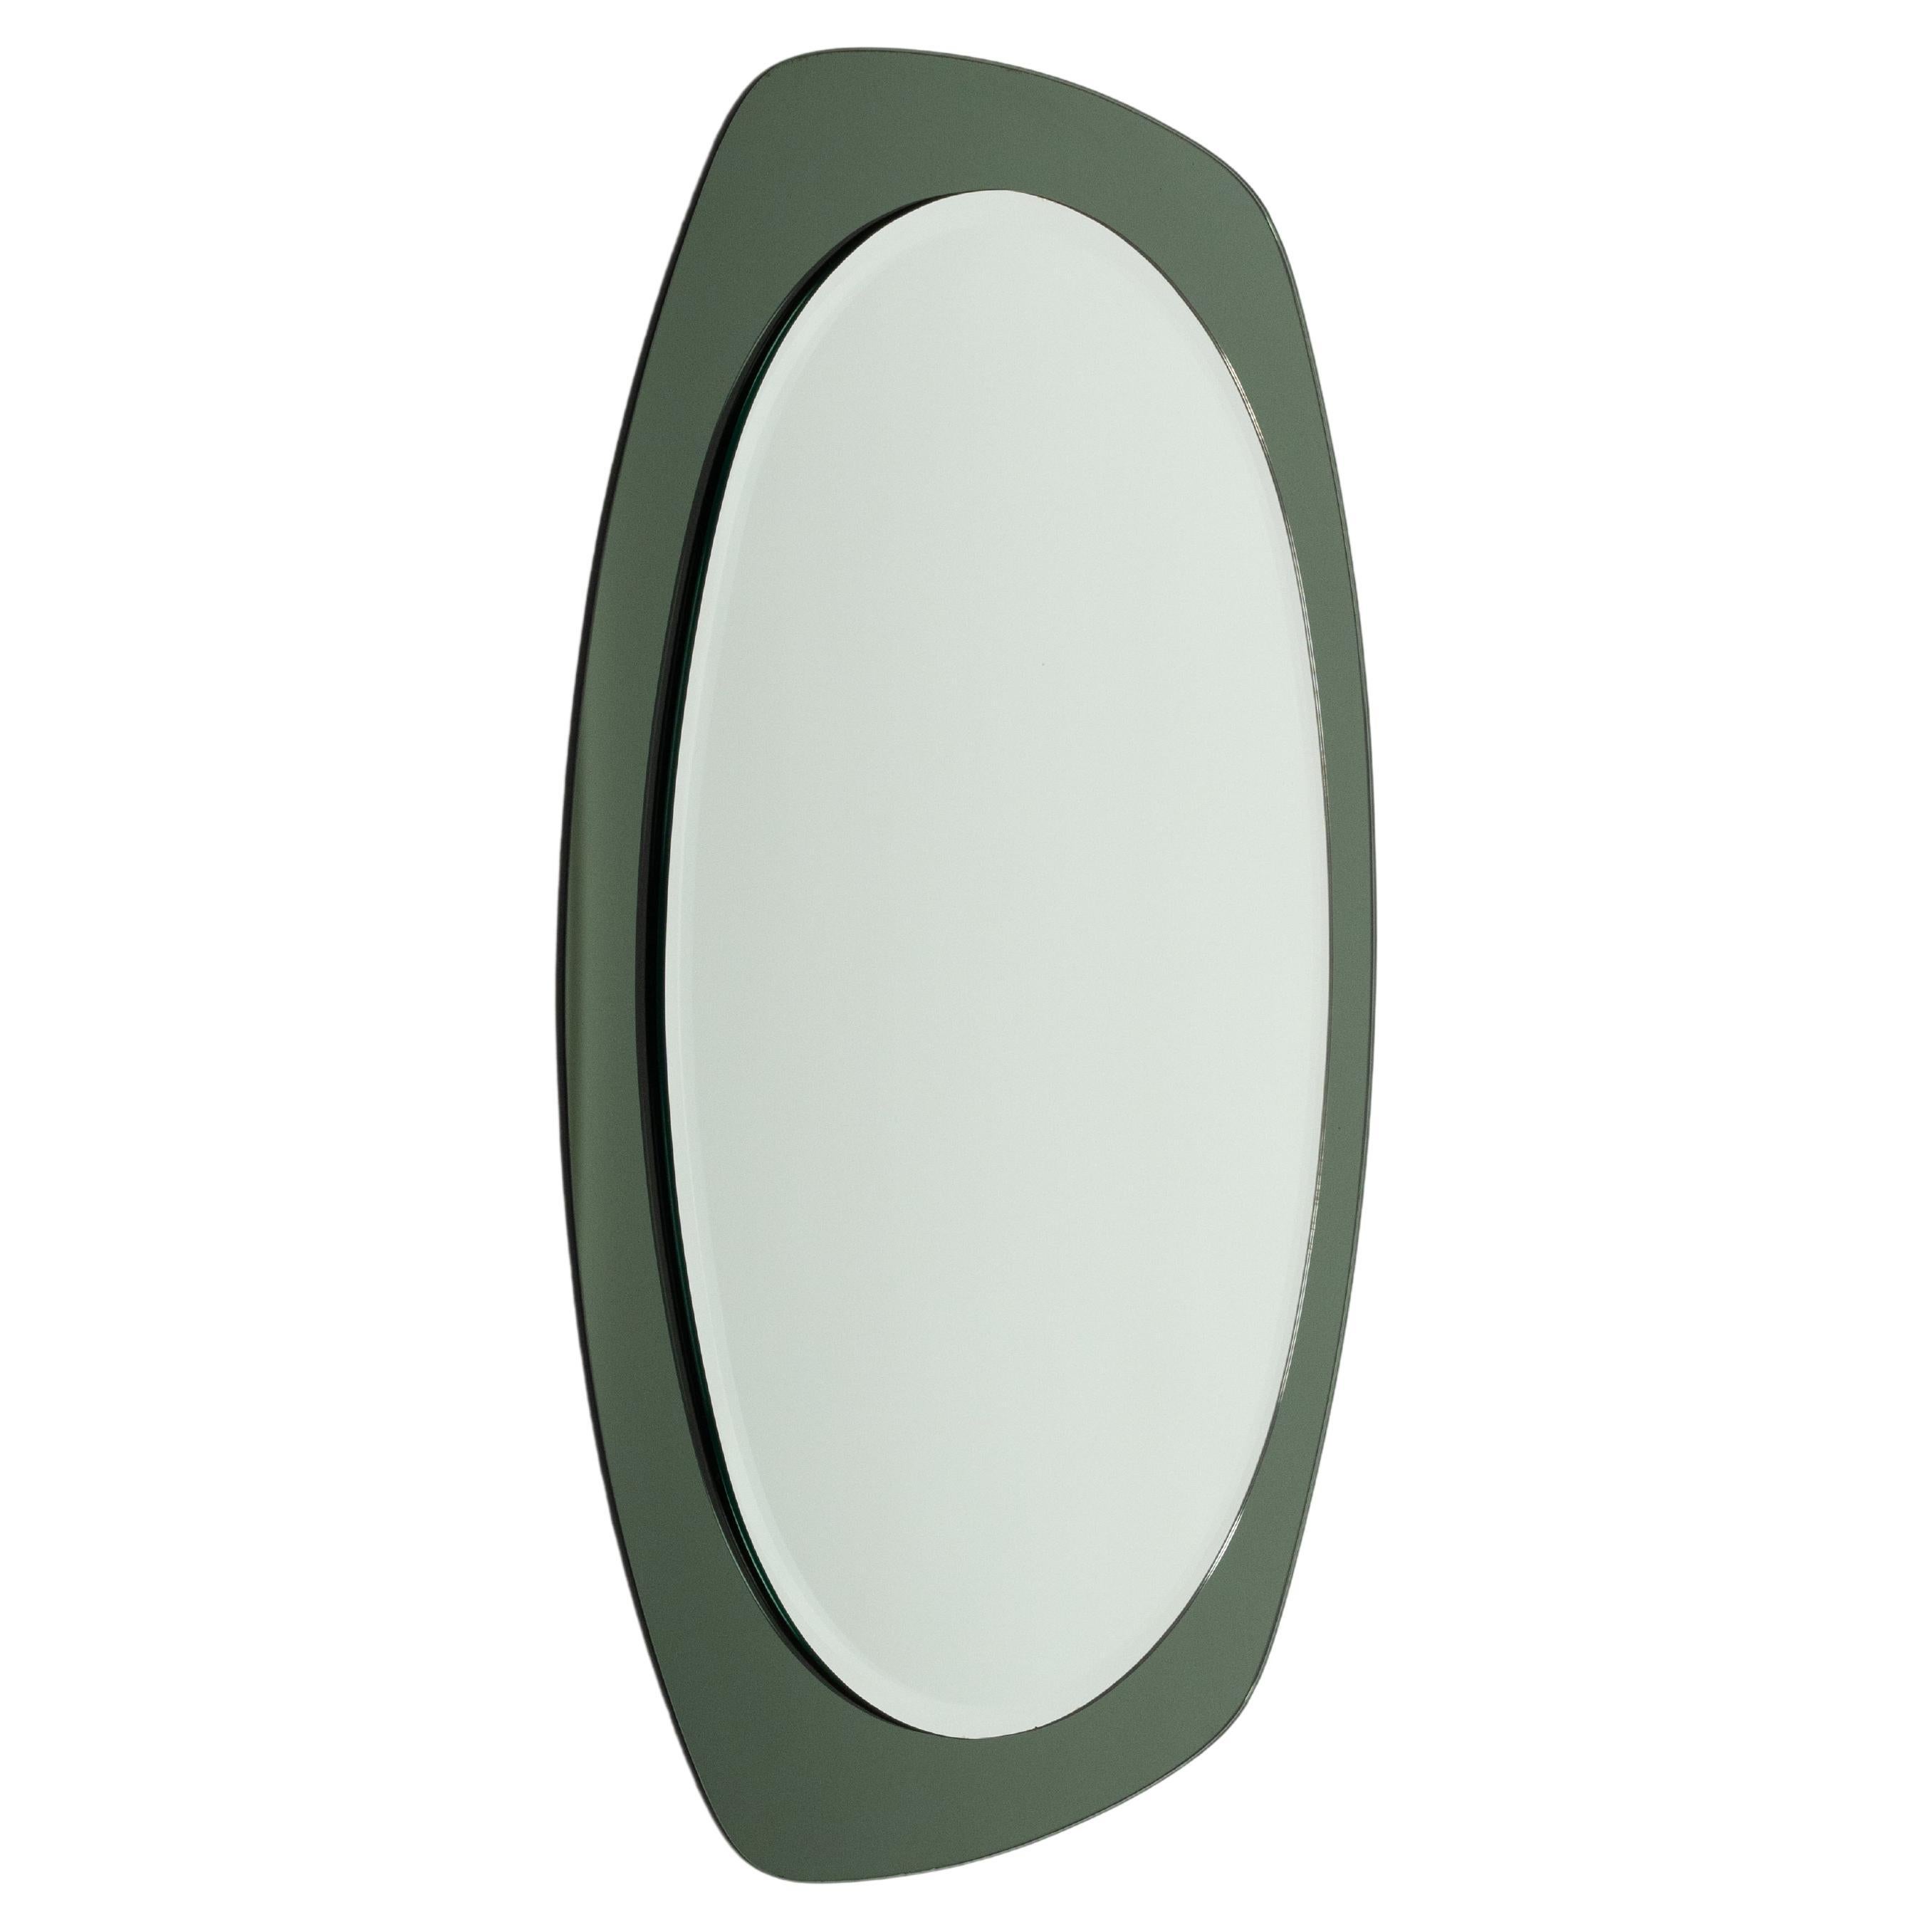 Midcentury beautiful double-level  oval wall mirror with a smoked green glass frame attributed to Cristal Art.

Made in Italy in the 1960s.